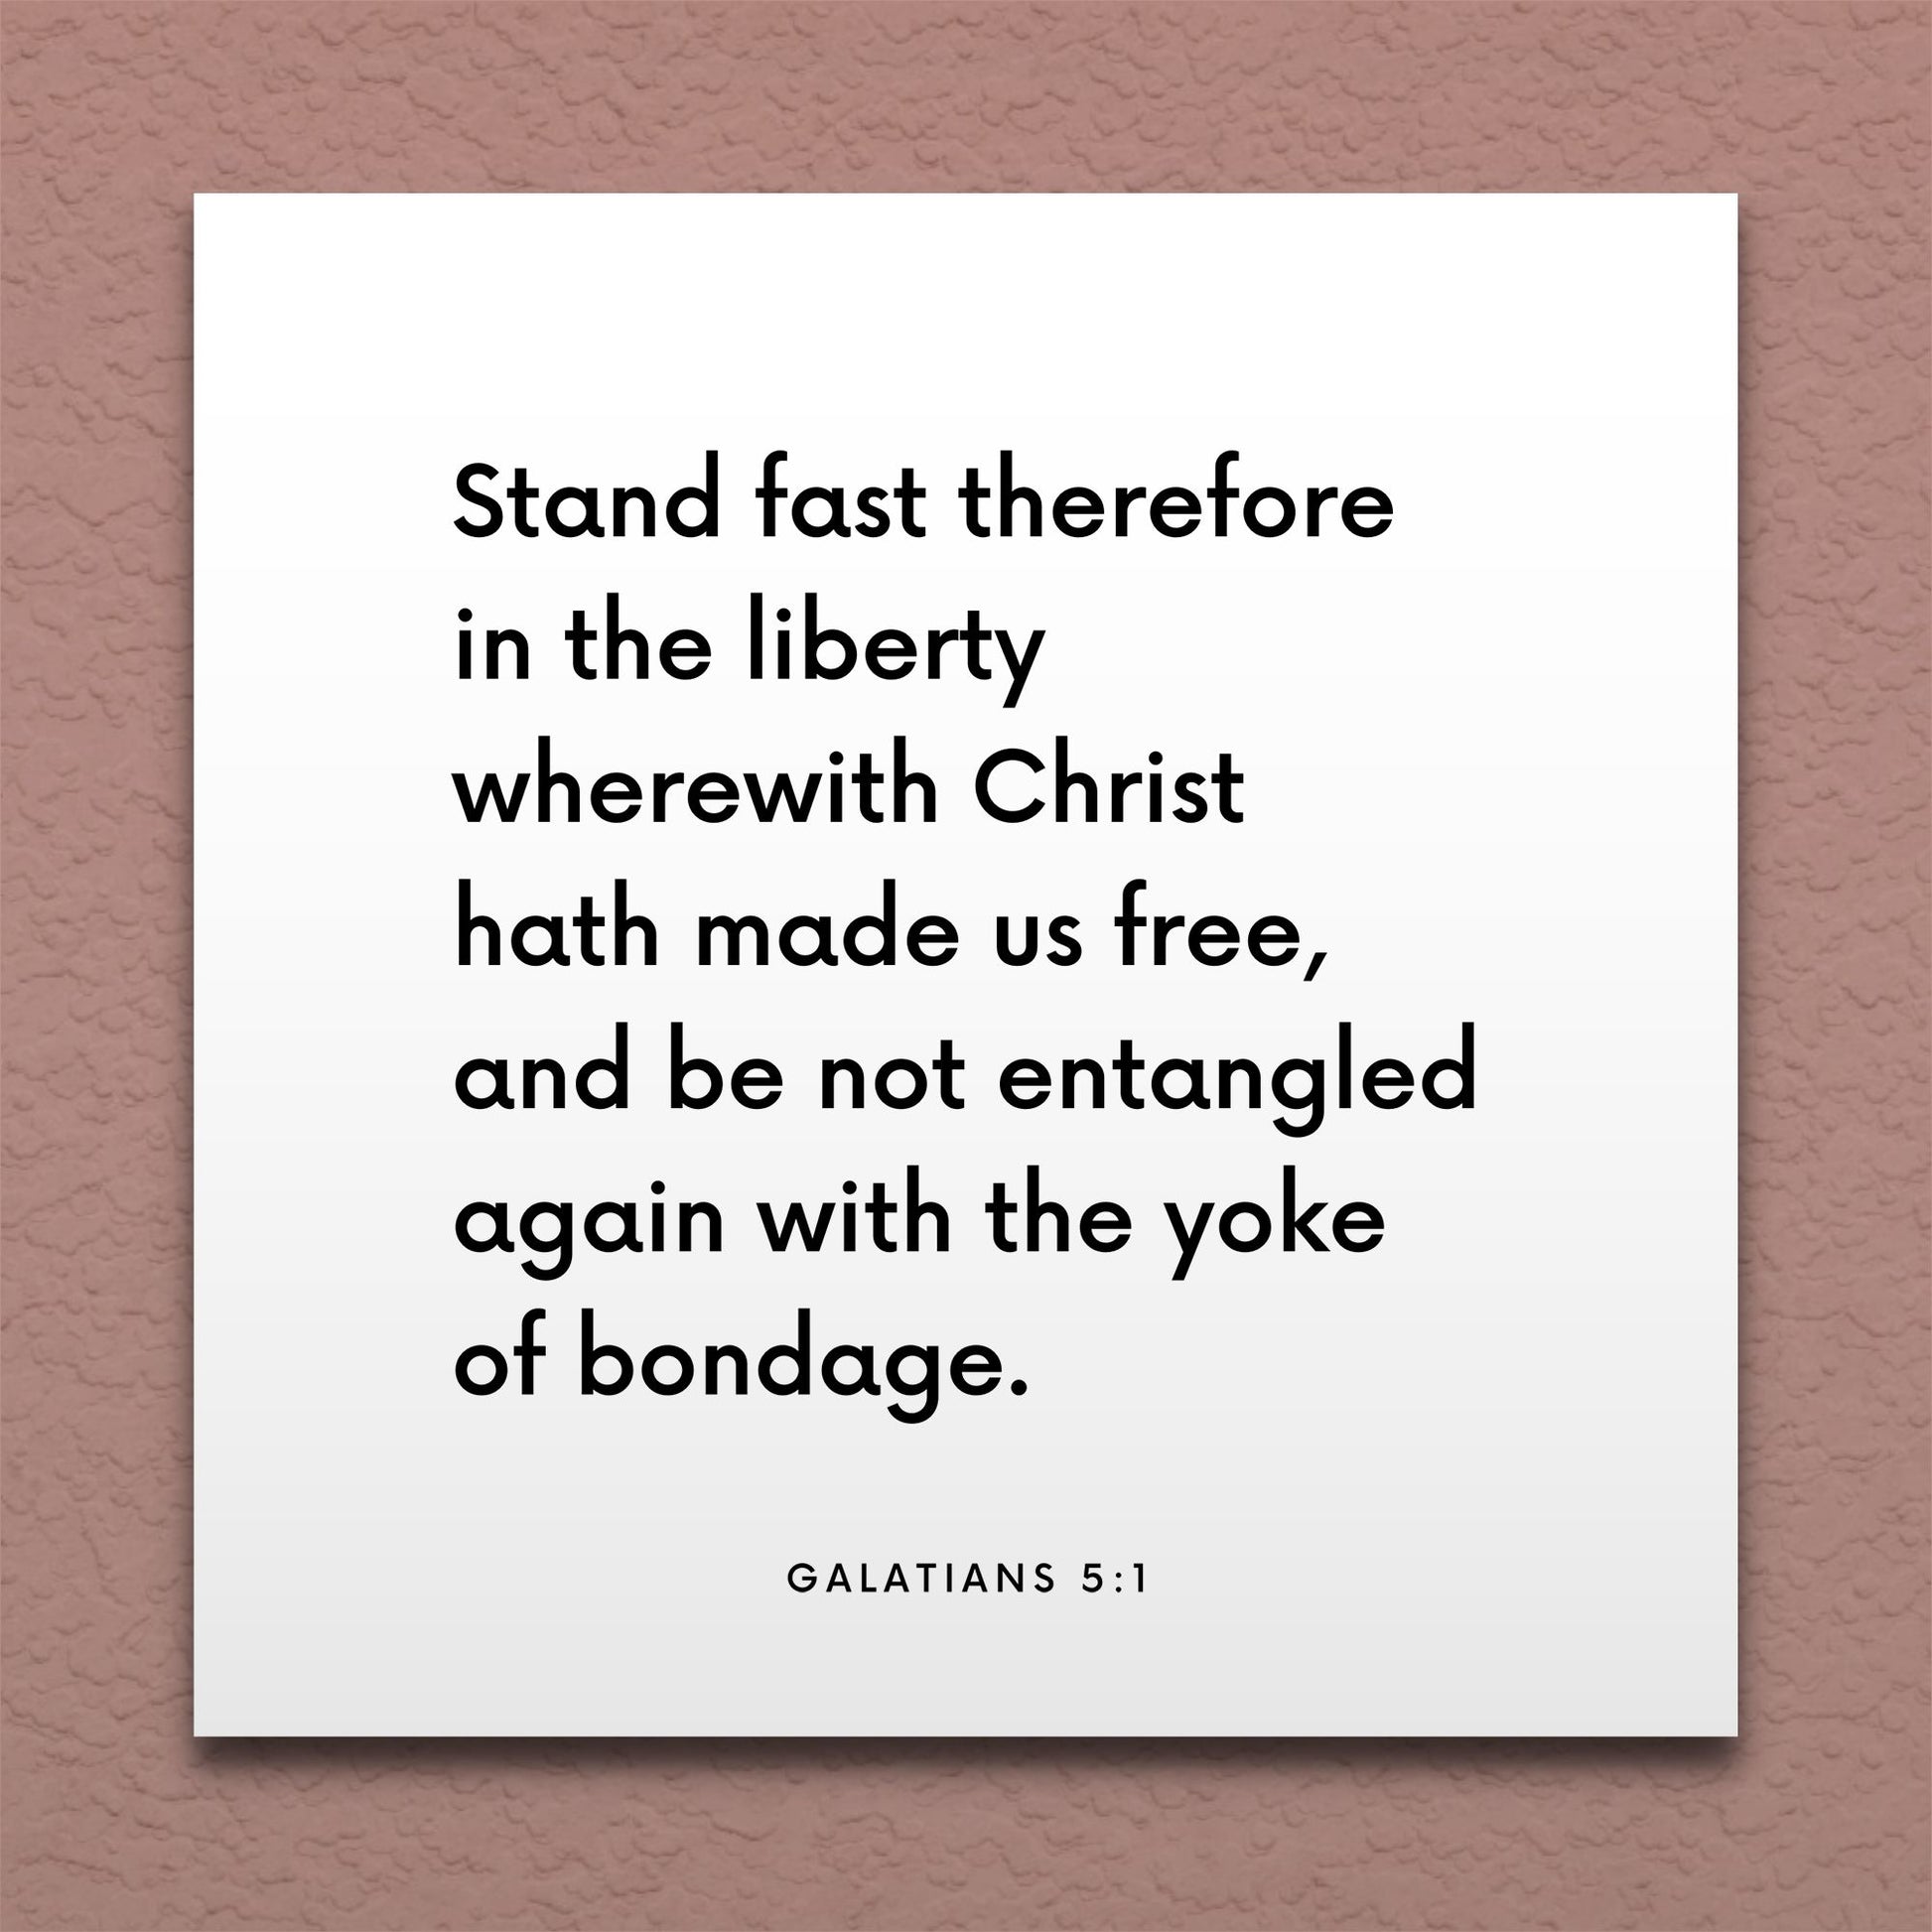 Wall-mounted scripture tile for Galatians 5:1 - "Stand fast in the liberty wherewith Christ hath made us free"